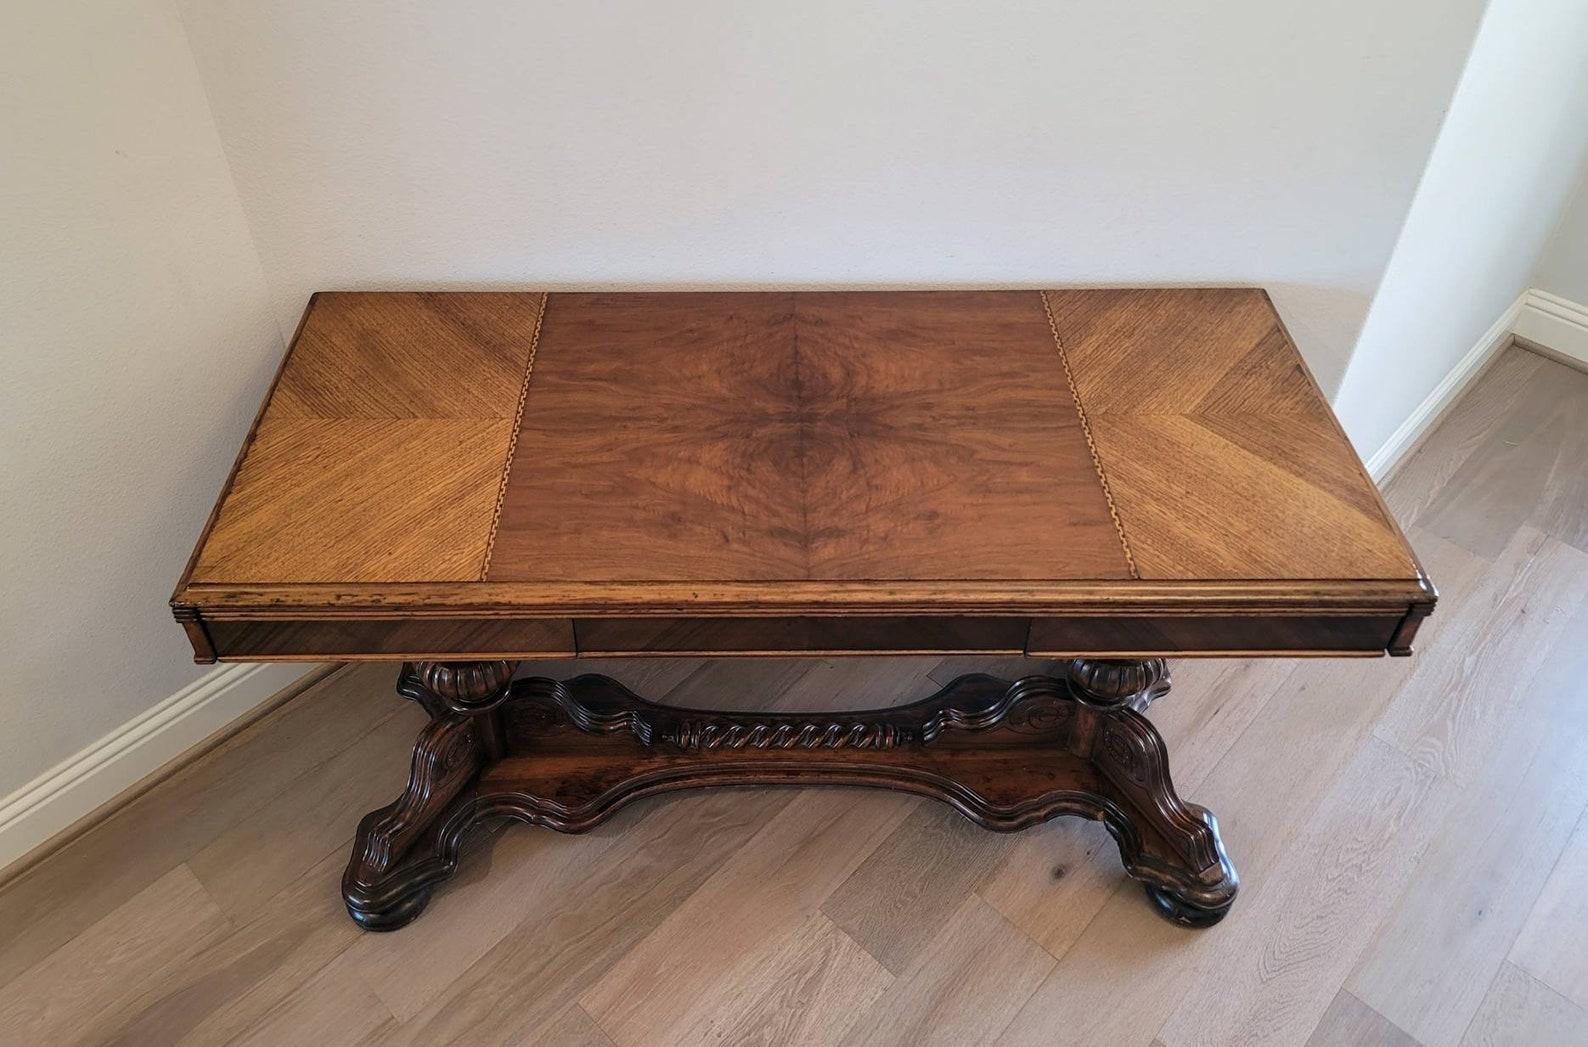 A scarce antique American Renaissance Revival style carved walnut extension table by Seng, Chicago, Illinois. circa 1920/1930

Born in the United States in the early 20th century, featuring a rare and unusual form and extension mechanism. Slightly